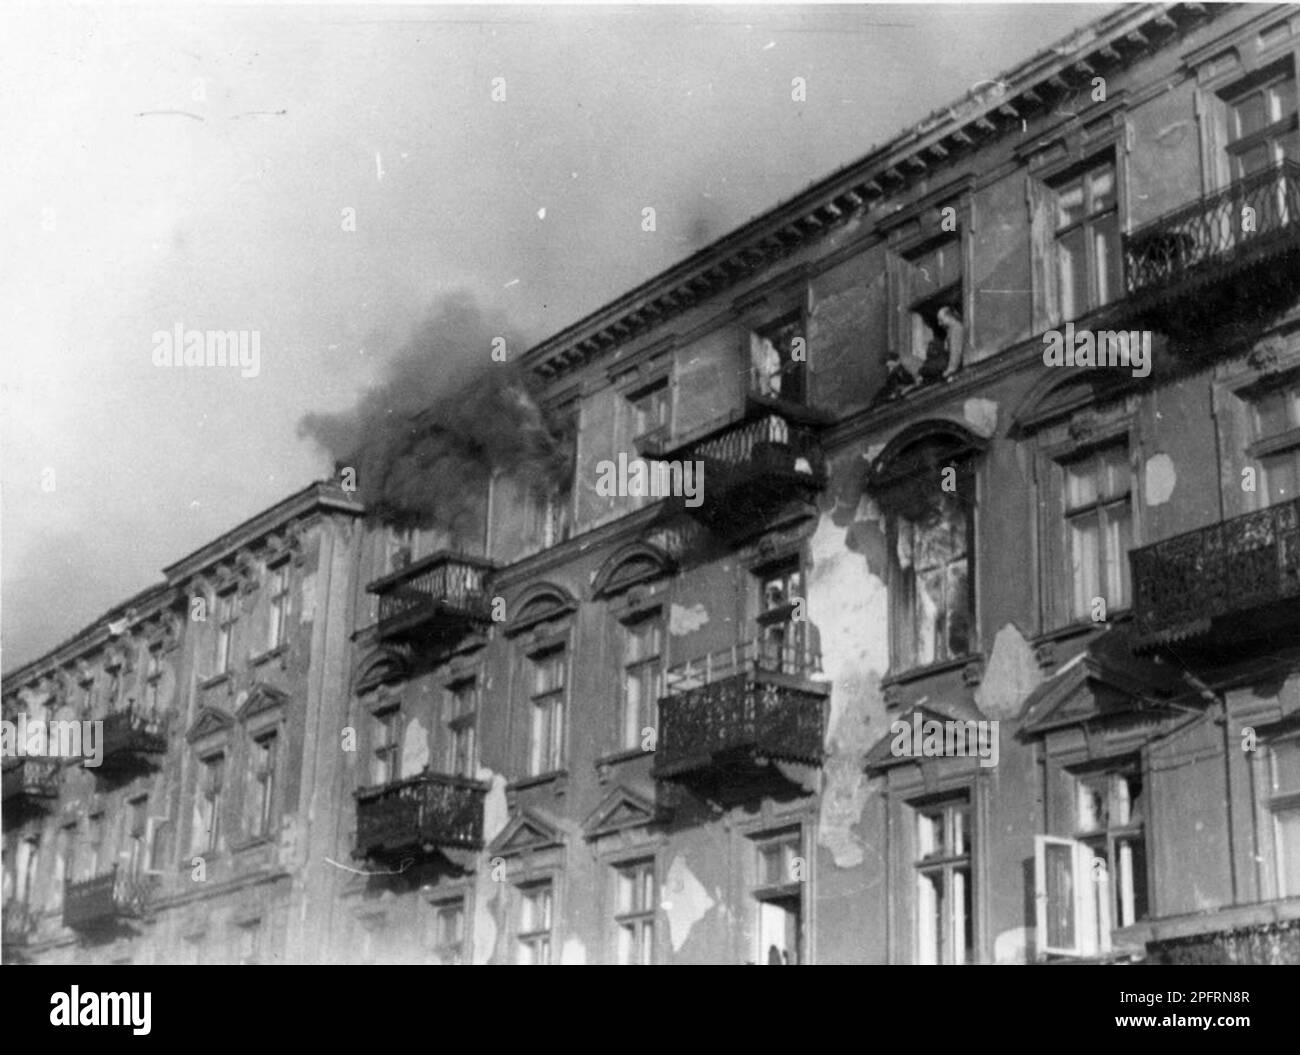 In January 1943 the nazis arrived to round up the Jews of the Warsaw Ghetto  The Jews, resolved to fight it out, took on the SS with homemade and primitive weapons. The defenders were executed or deported and the Ghetto area was systematically demolished. This event is known as The Ghetto Uprising. This image shows a group of Jews in an upstairs window preparing to jump rather than be caught. This image is from the German photographic record of the event, known as the Stroop report. Stock Photo